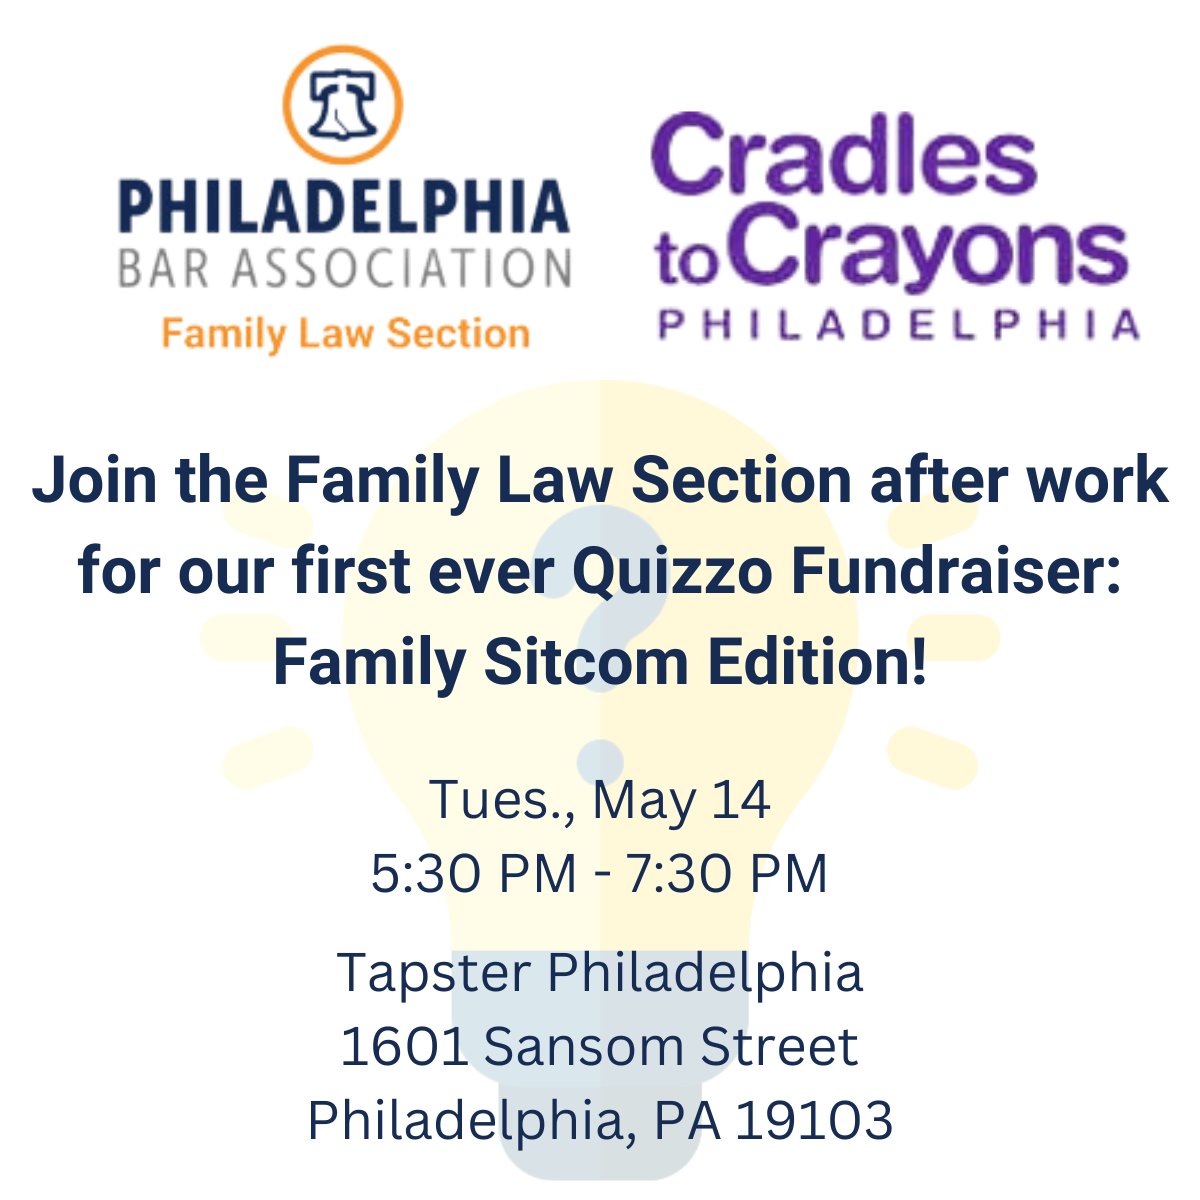 Please join the Family Law Section after work for their first ever Quizzo Fundraiser: Family Sitcom Edition! No need to bring a team with you, or any specific knowledge—teams will be formed the night of the event! Register today: ow.ly/nNLE50Rh1Ev